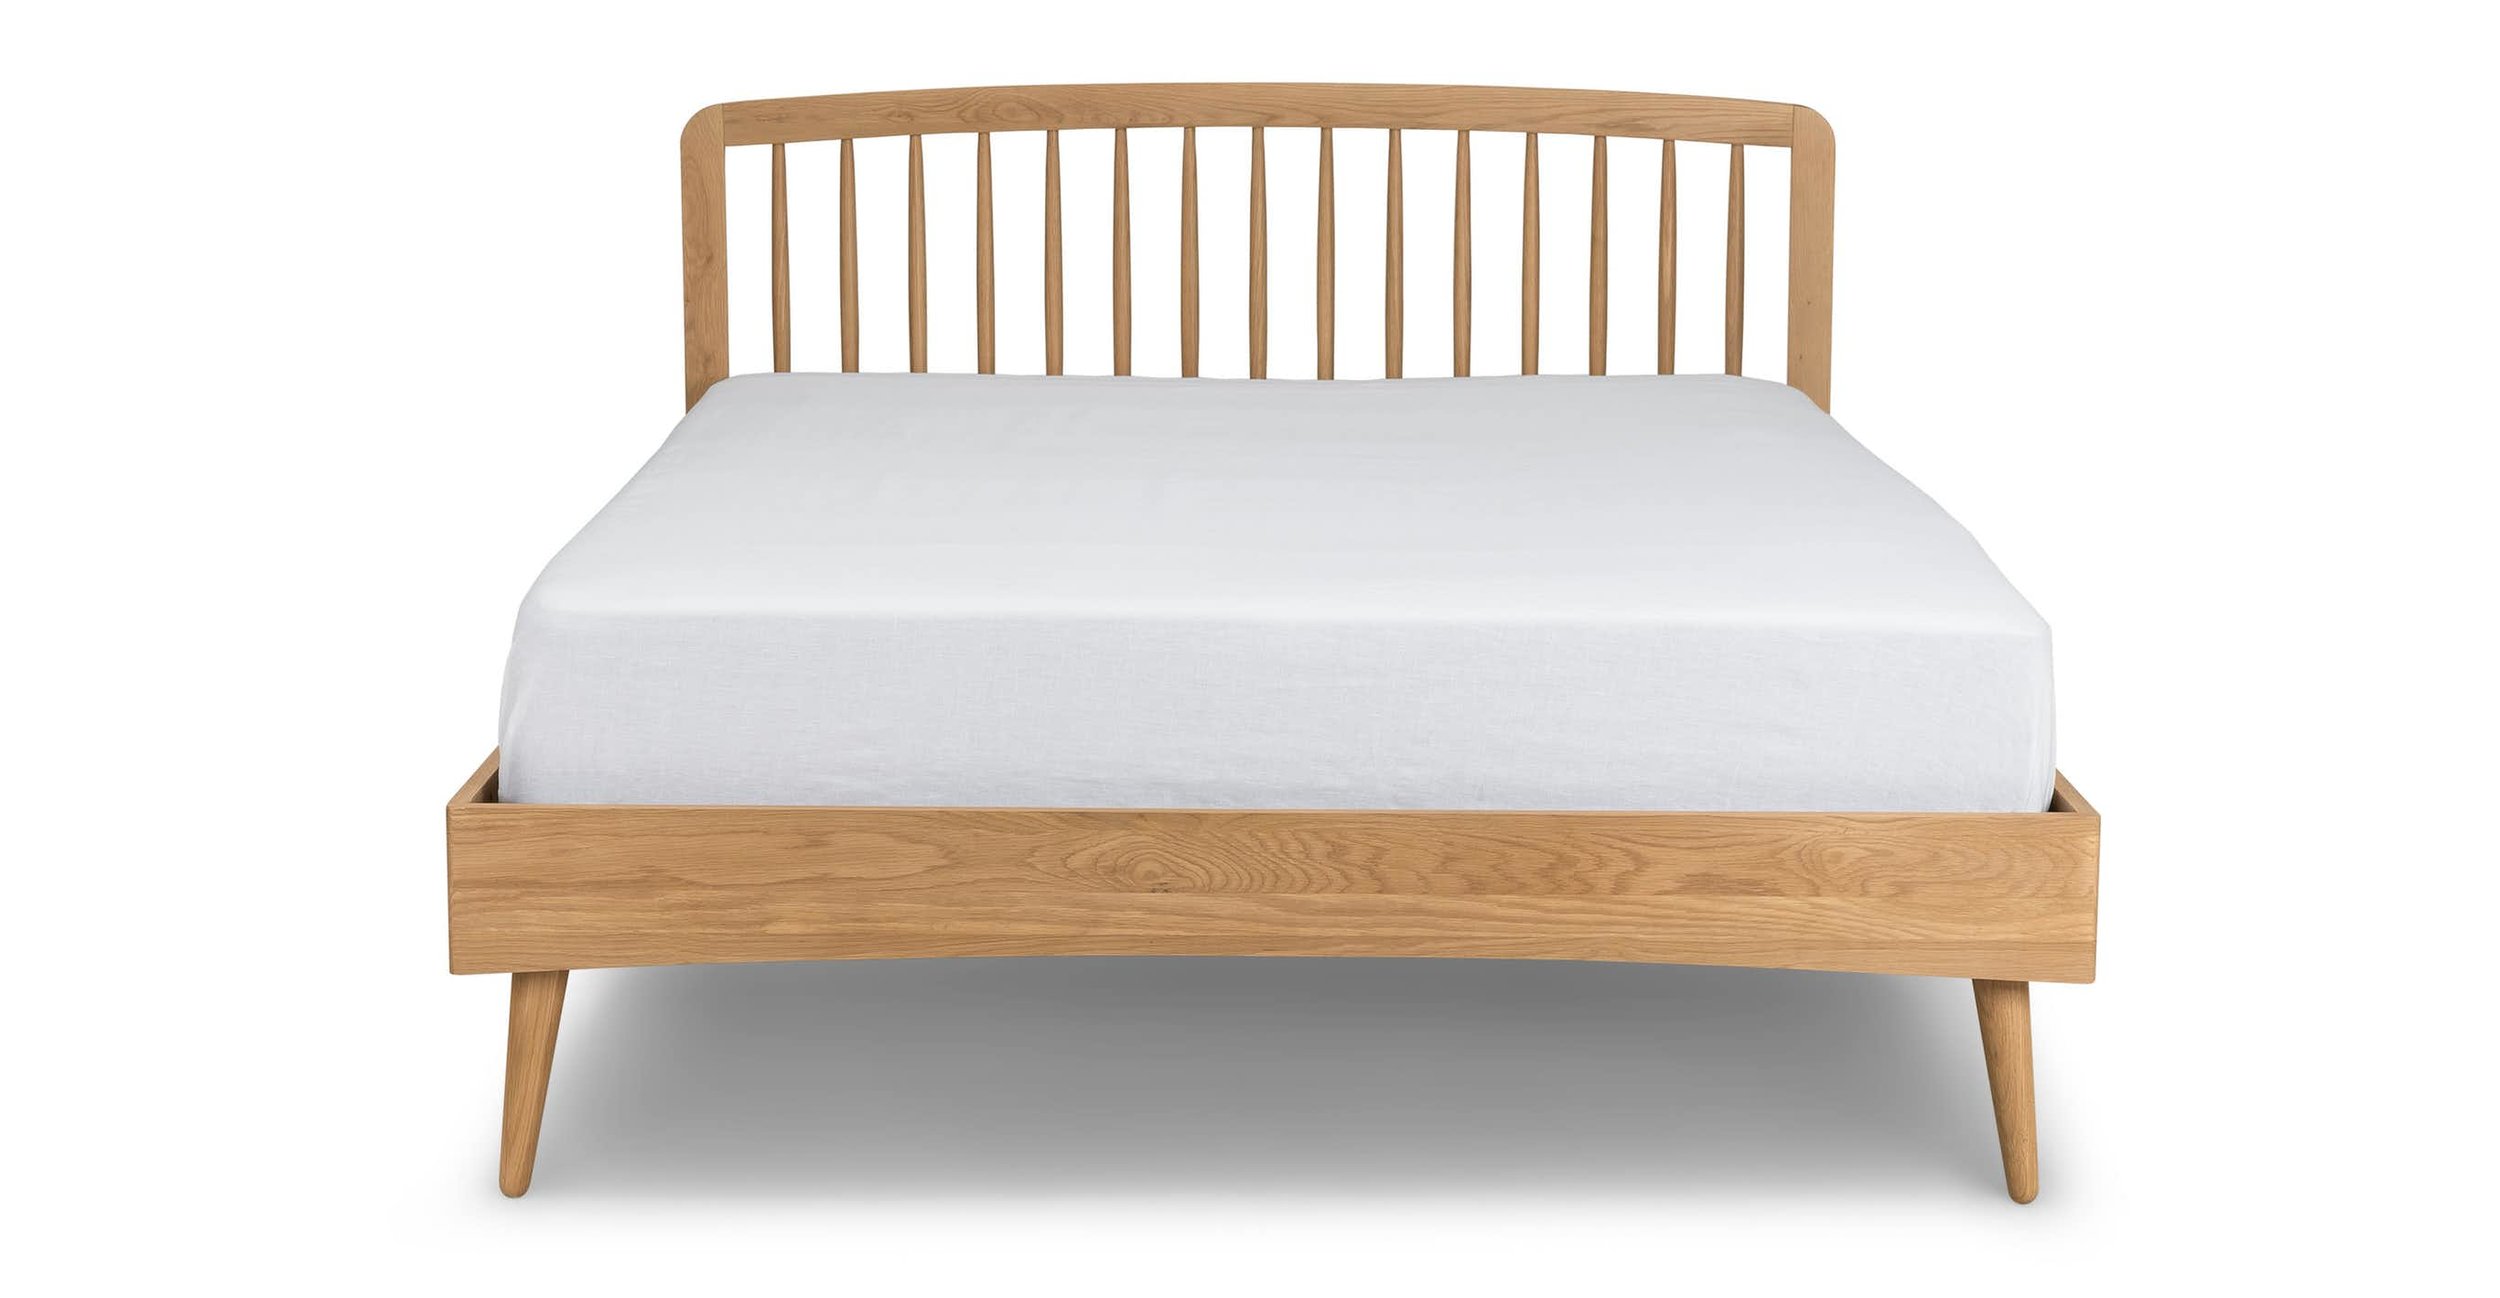 Article Culla White Oak Spindle Bed